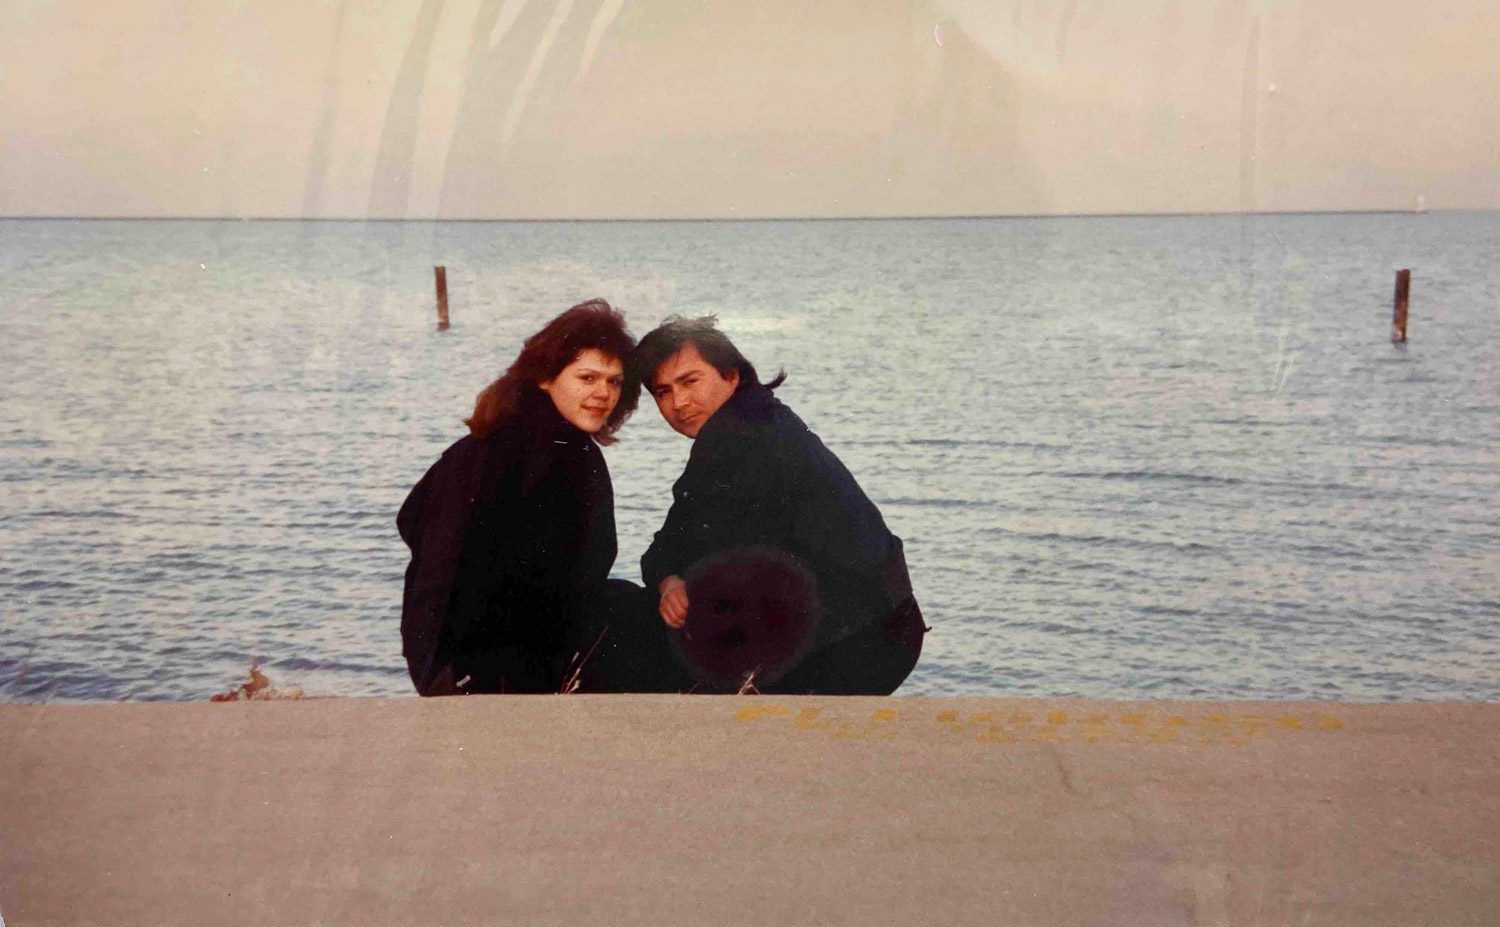 Rosa Maria Borjon and Jose Juan Borjon leaning close to each other on a cold day at Lake Michigan in Chicago